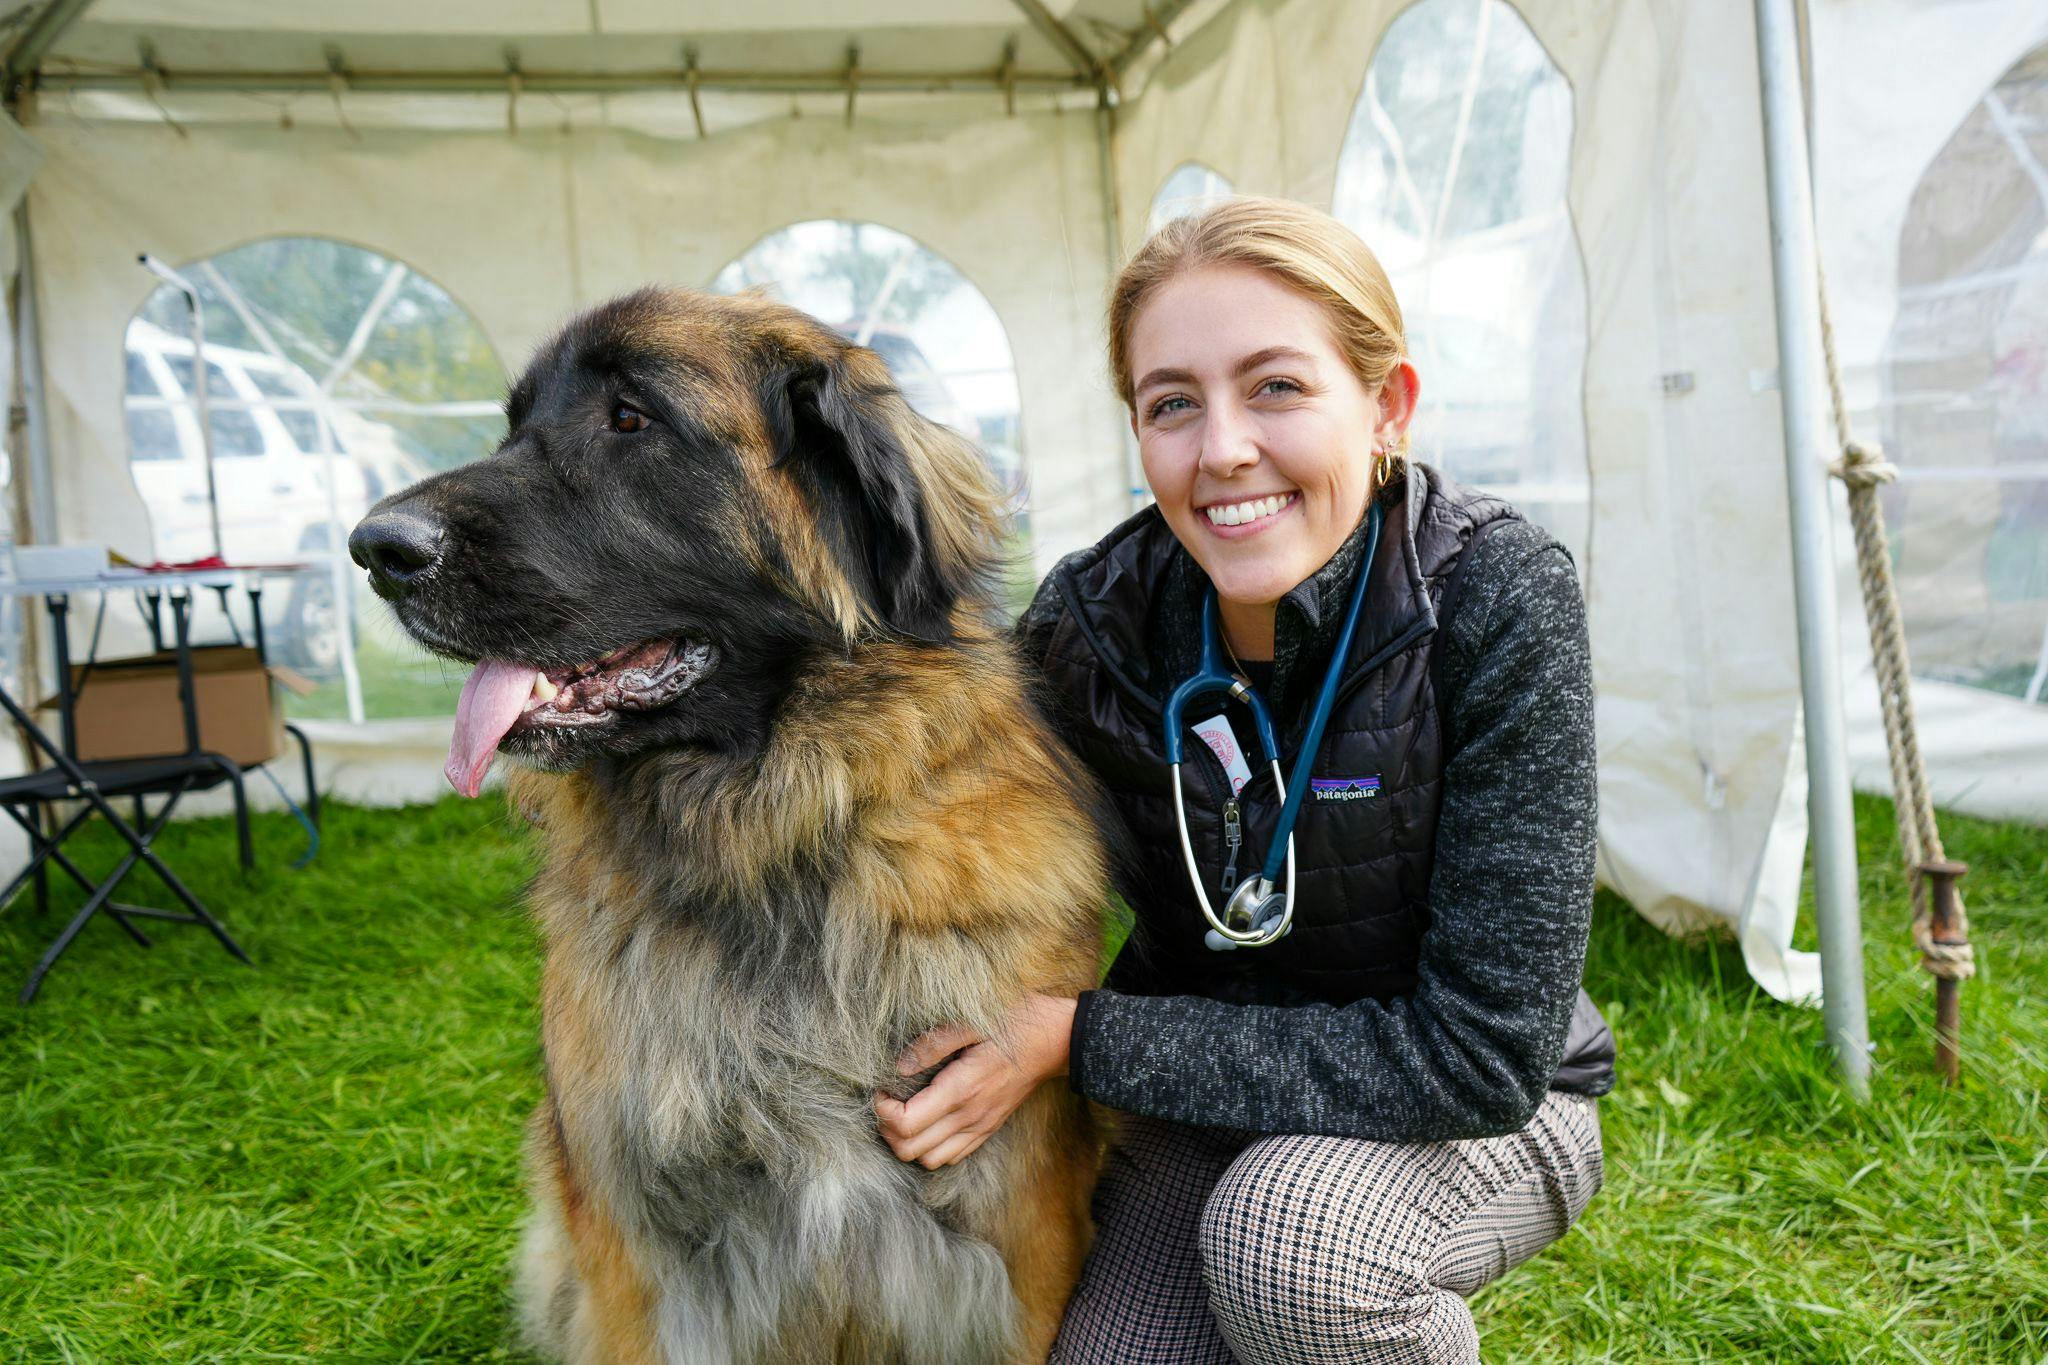 Cornell veterinary students gain shadowing experience at the Wine Country Circuit Dog Show